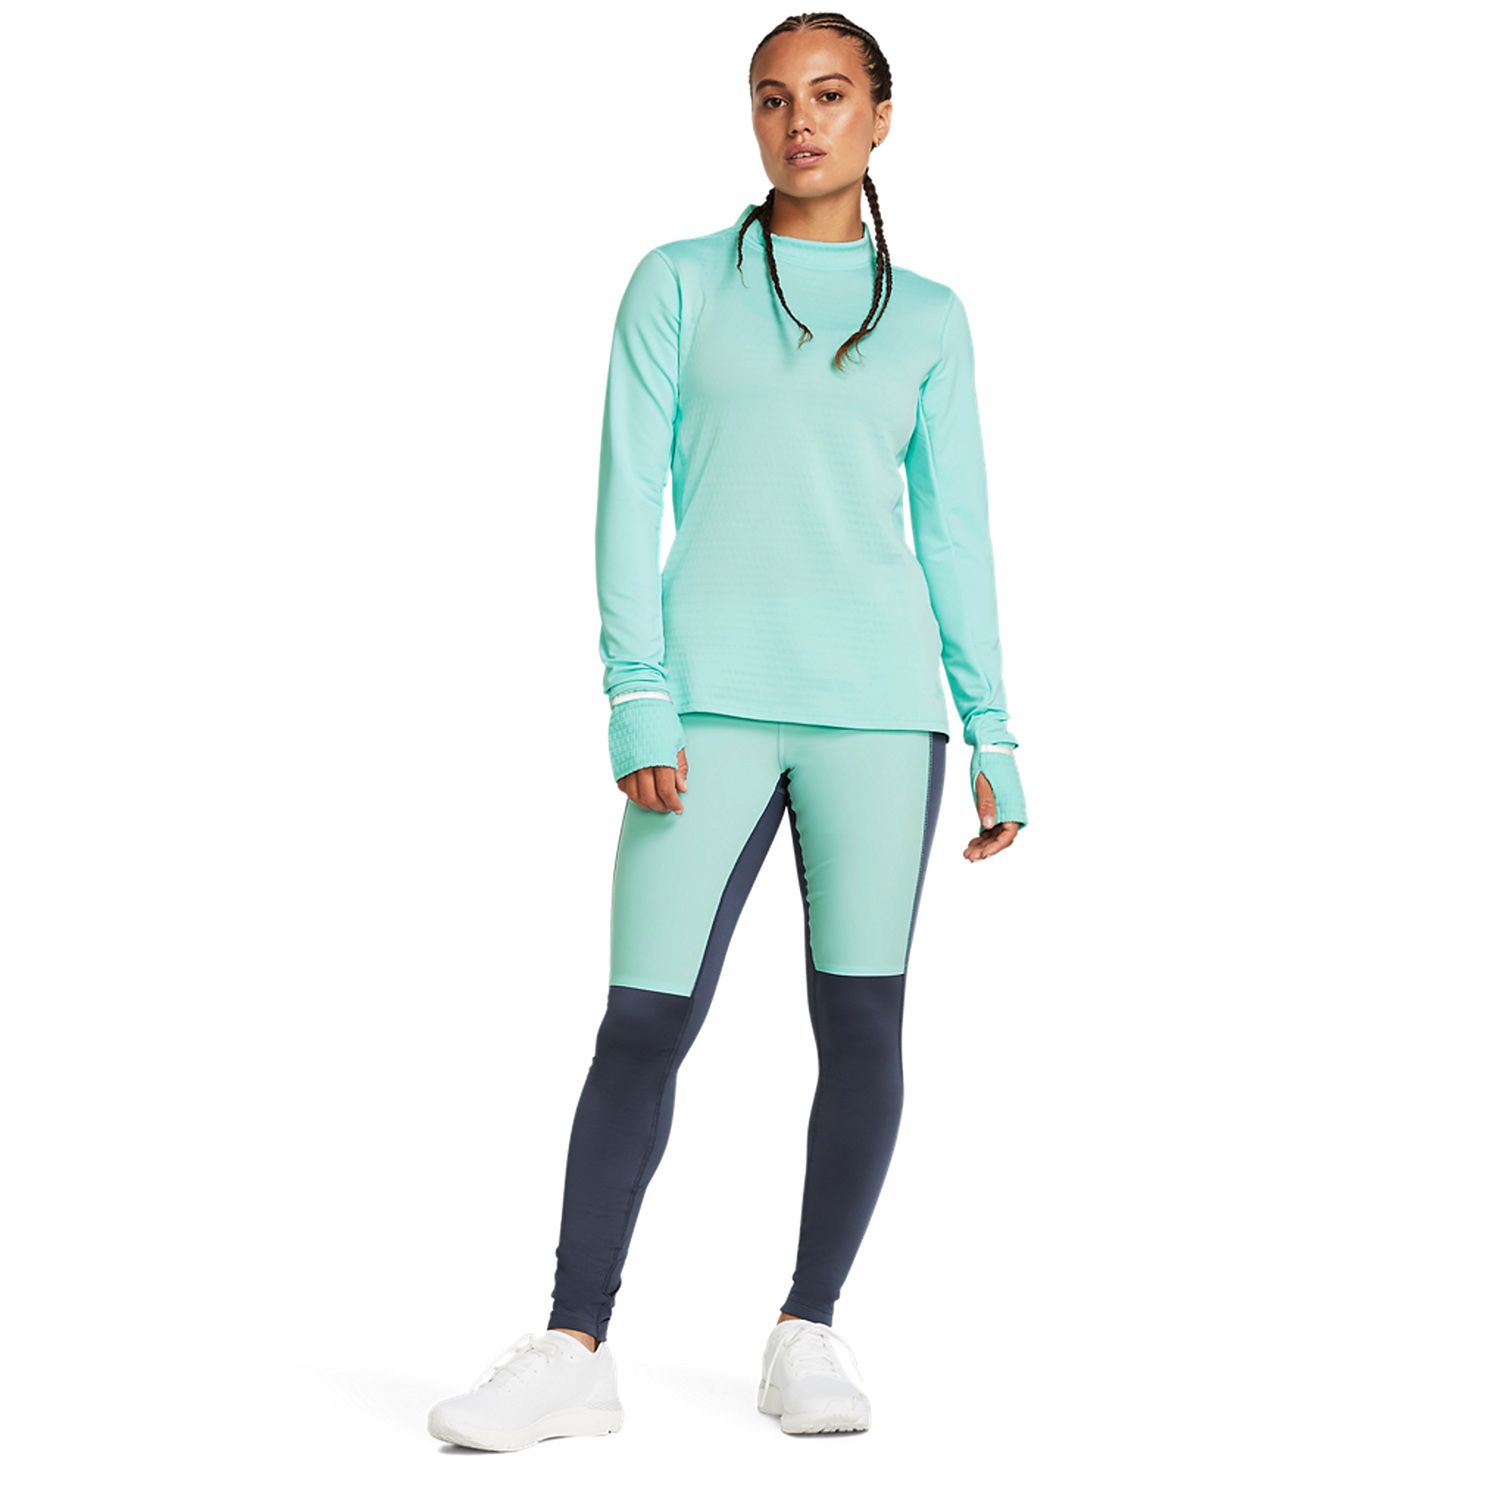 Under Armour Qualifier Cold Tights - Downpour Gray/Neo Turquoise/Reflective